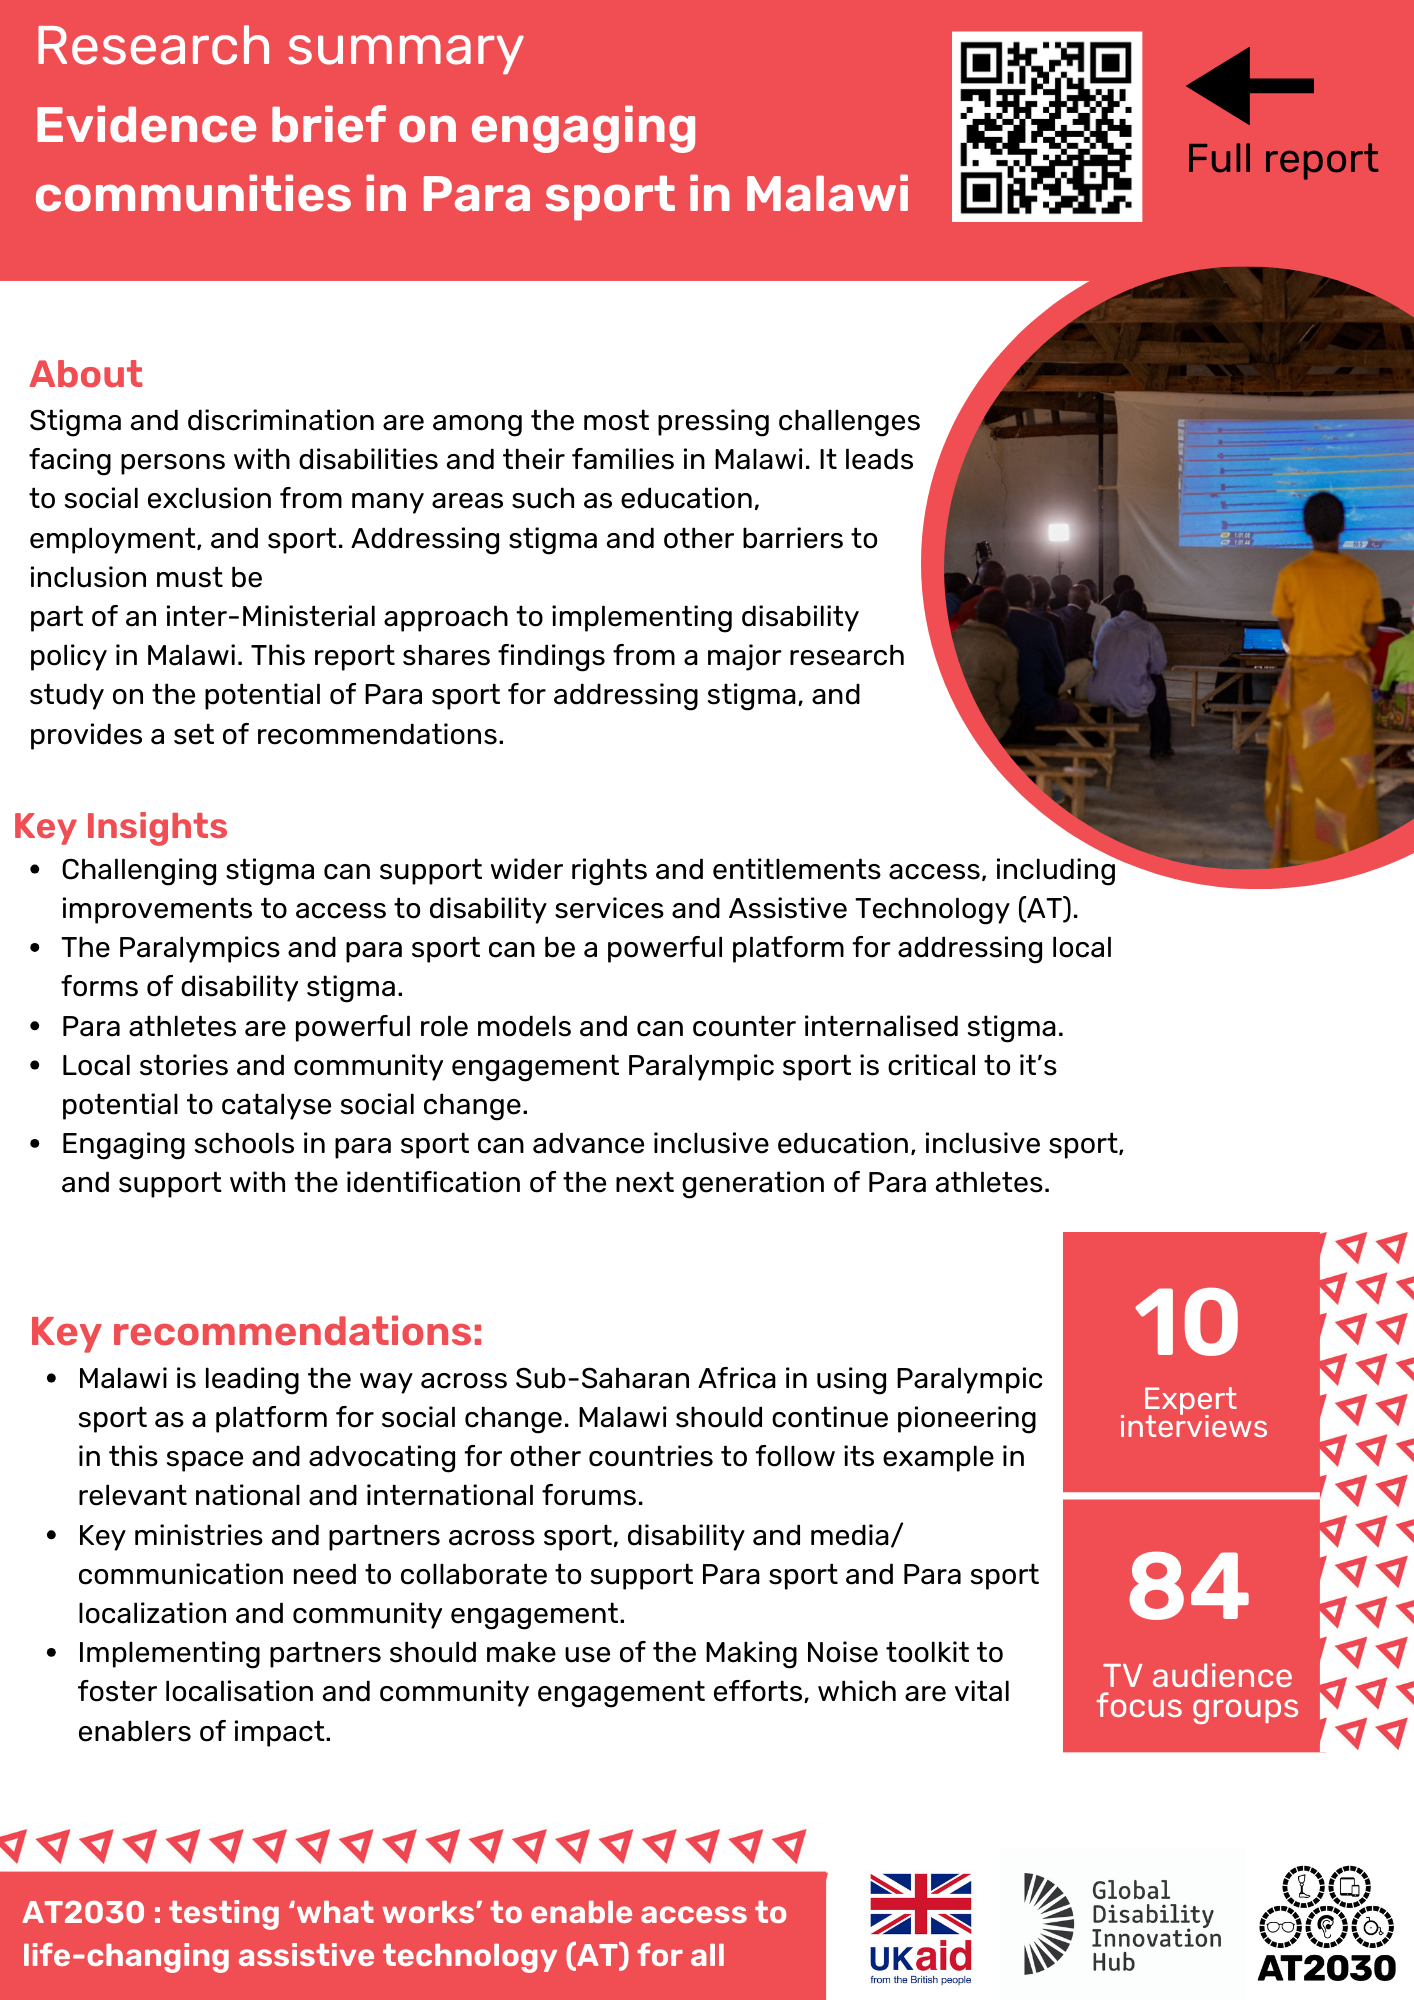 A one page document showing the research summary on Evidence brief on engaging communities in Para sport in Malawi Cover Image